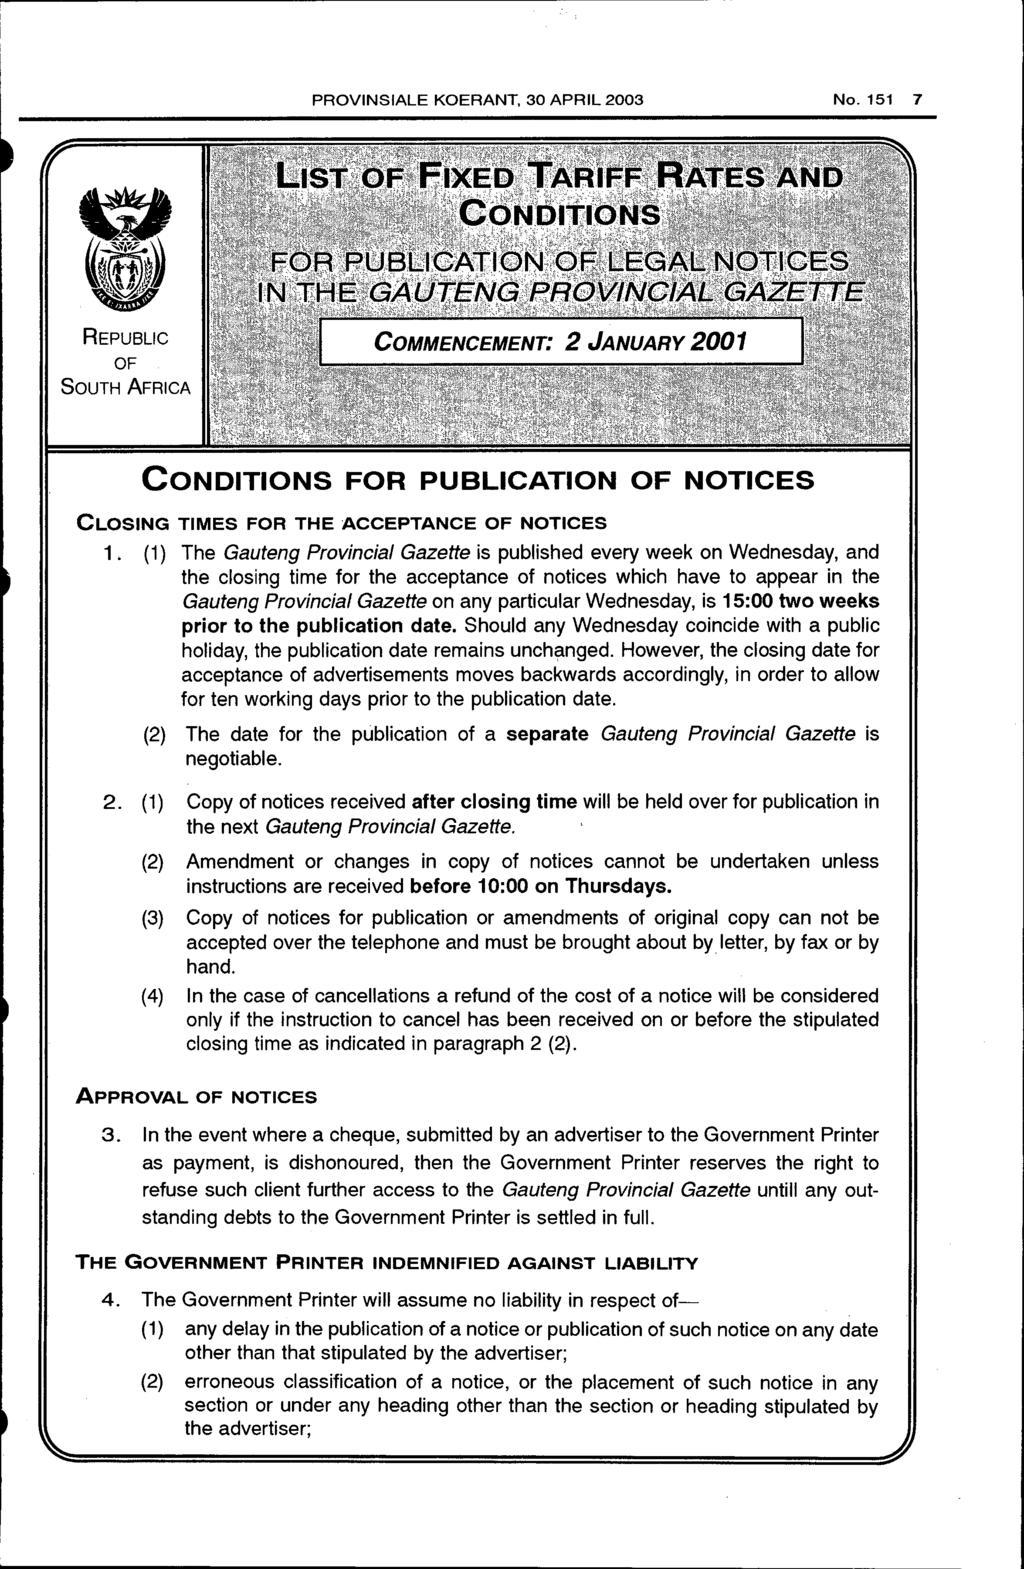 PROVINSIALE KOERANT, 30 APRIL 2003 No. 151 7 8 ~M~ ~ REPUBLIC OF SOUTH AFRICA CONDITIONS FOR PUBLICATION OF NOTICES CLOSING TIMES FOR THE ACCEPTANCE OF NOTICES 1.